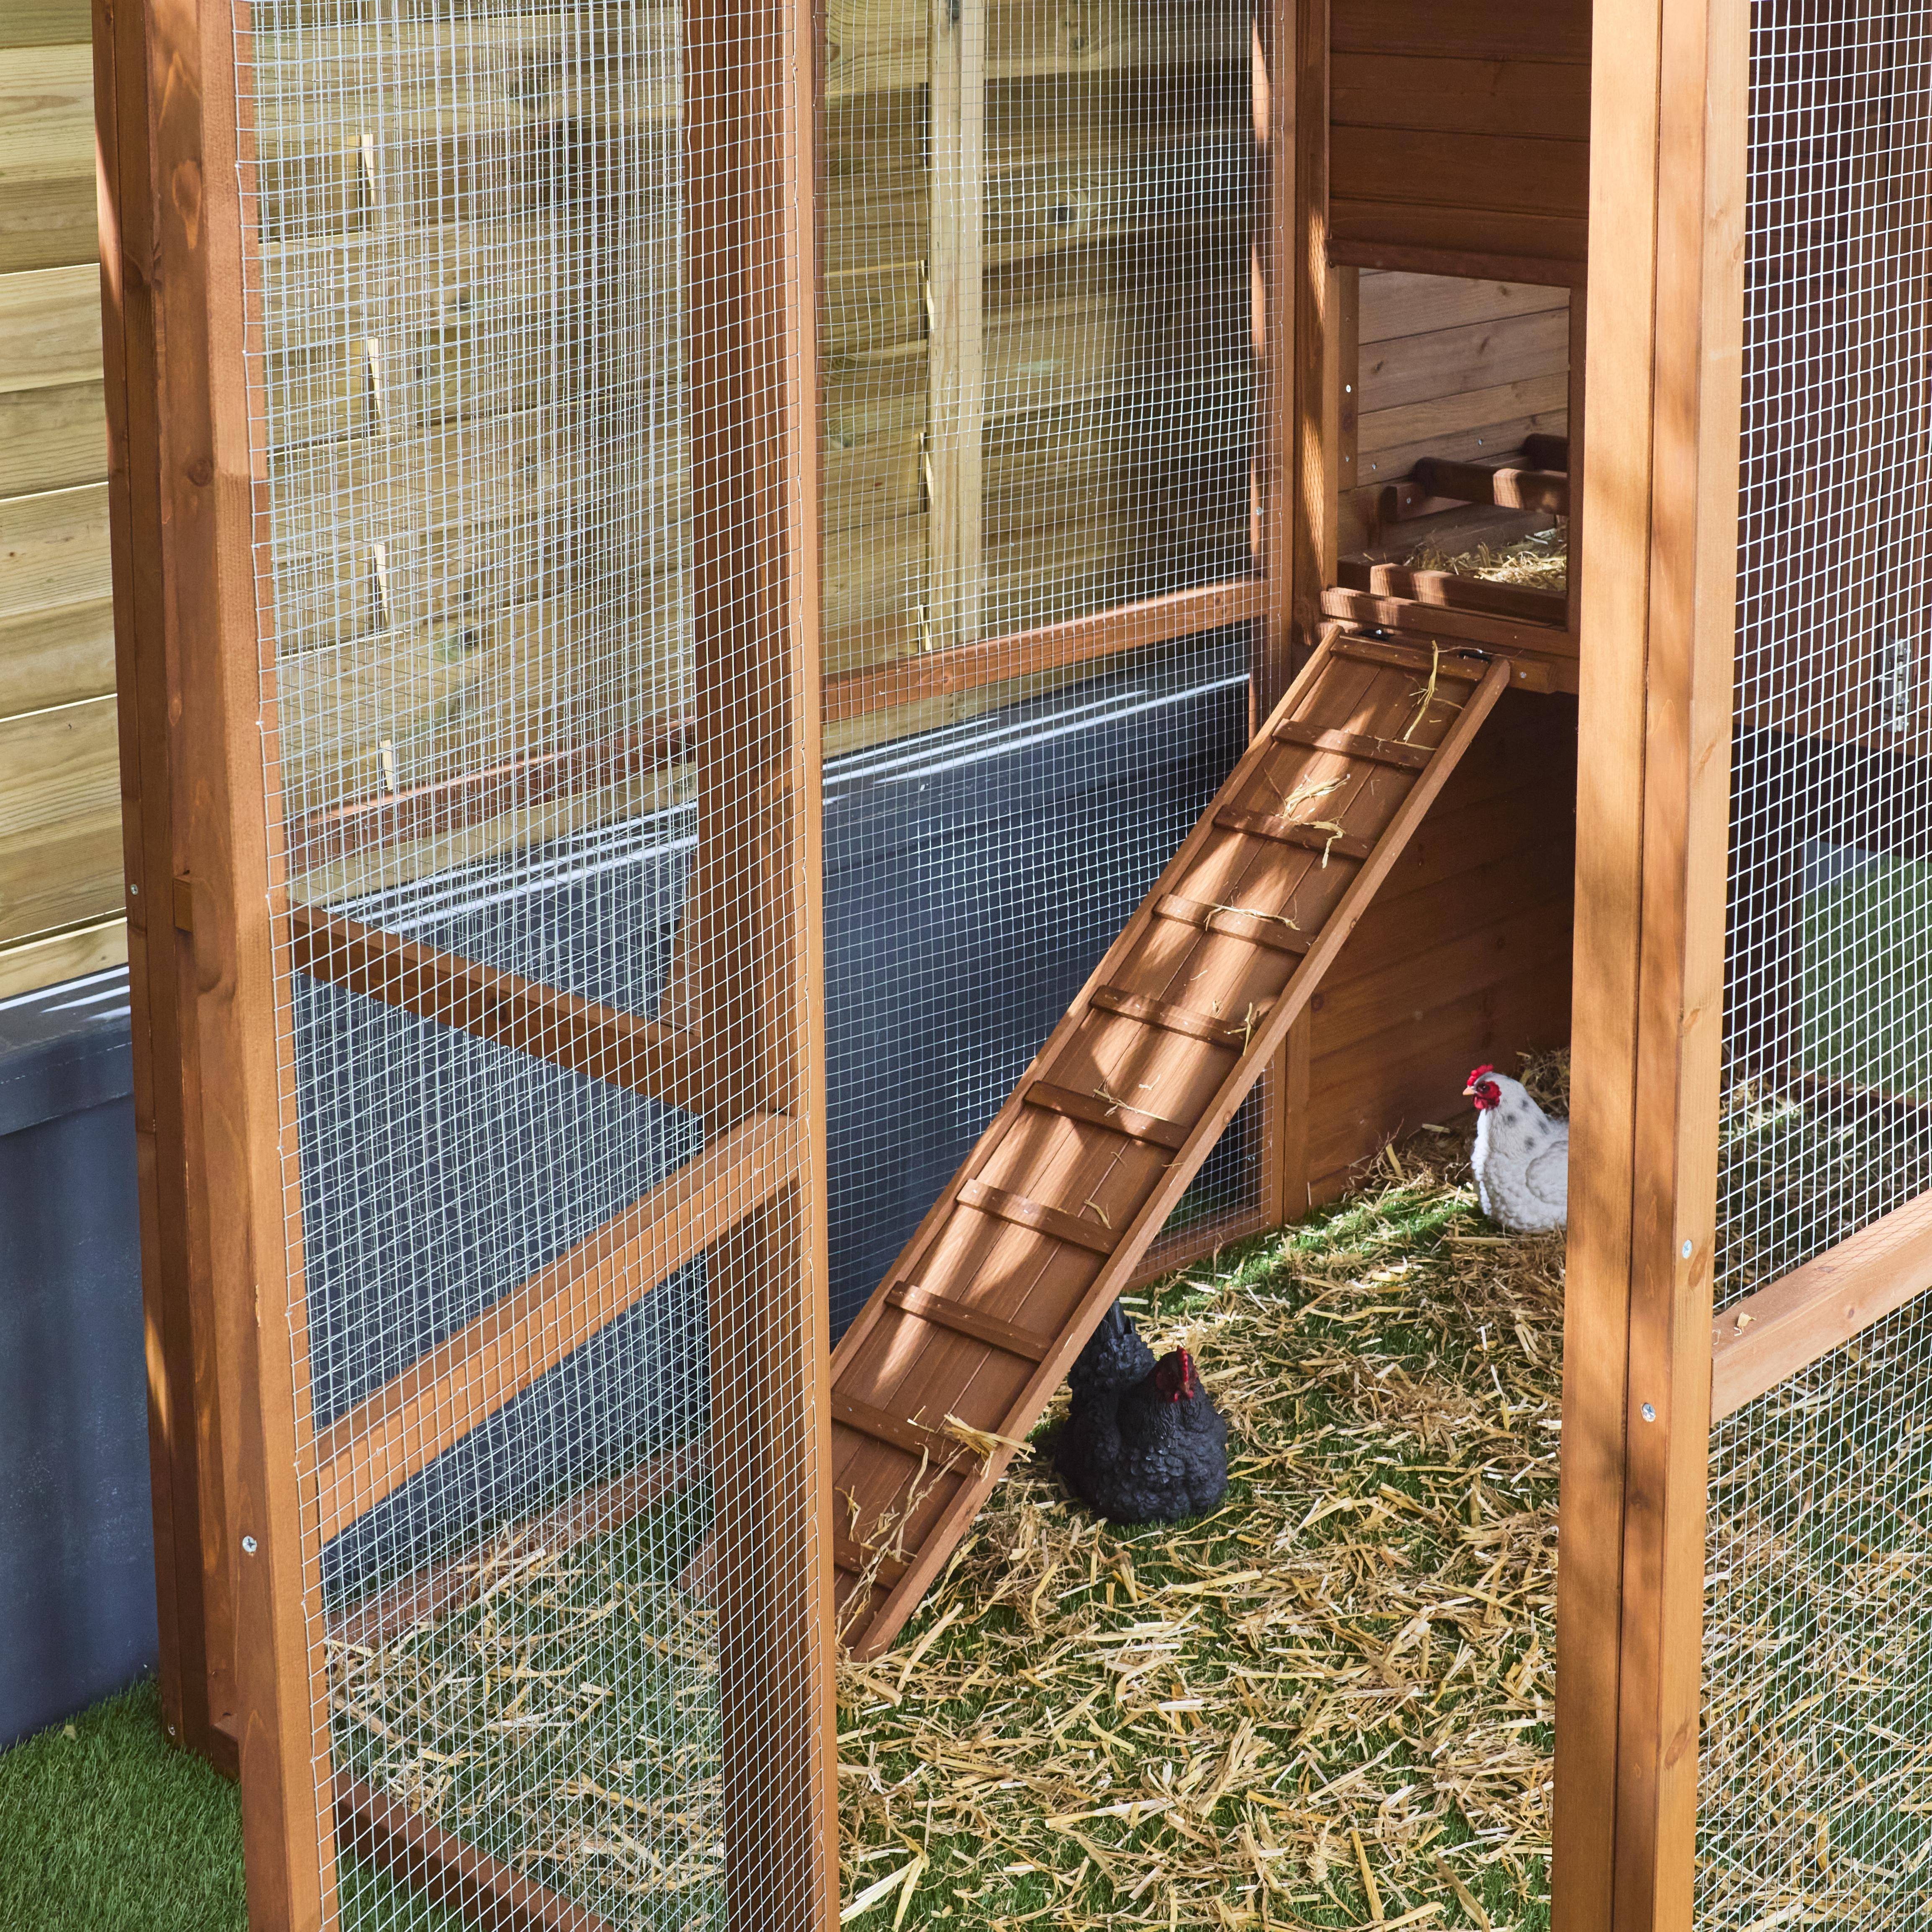 Wooden chicken coop - backyard hen cage for 6 to 8 chickens, indoor and outdoor space - Cotentine - Wood colour,sweeek,Photo3